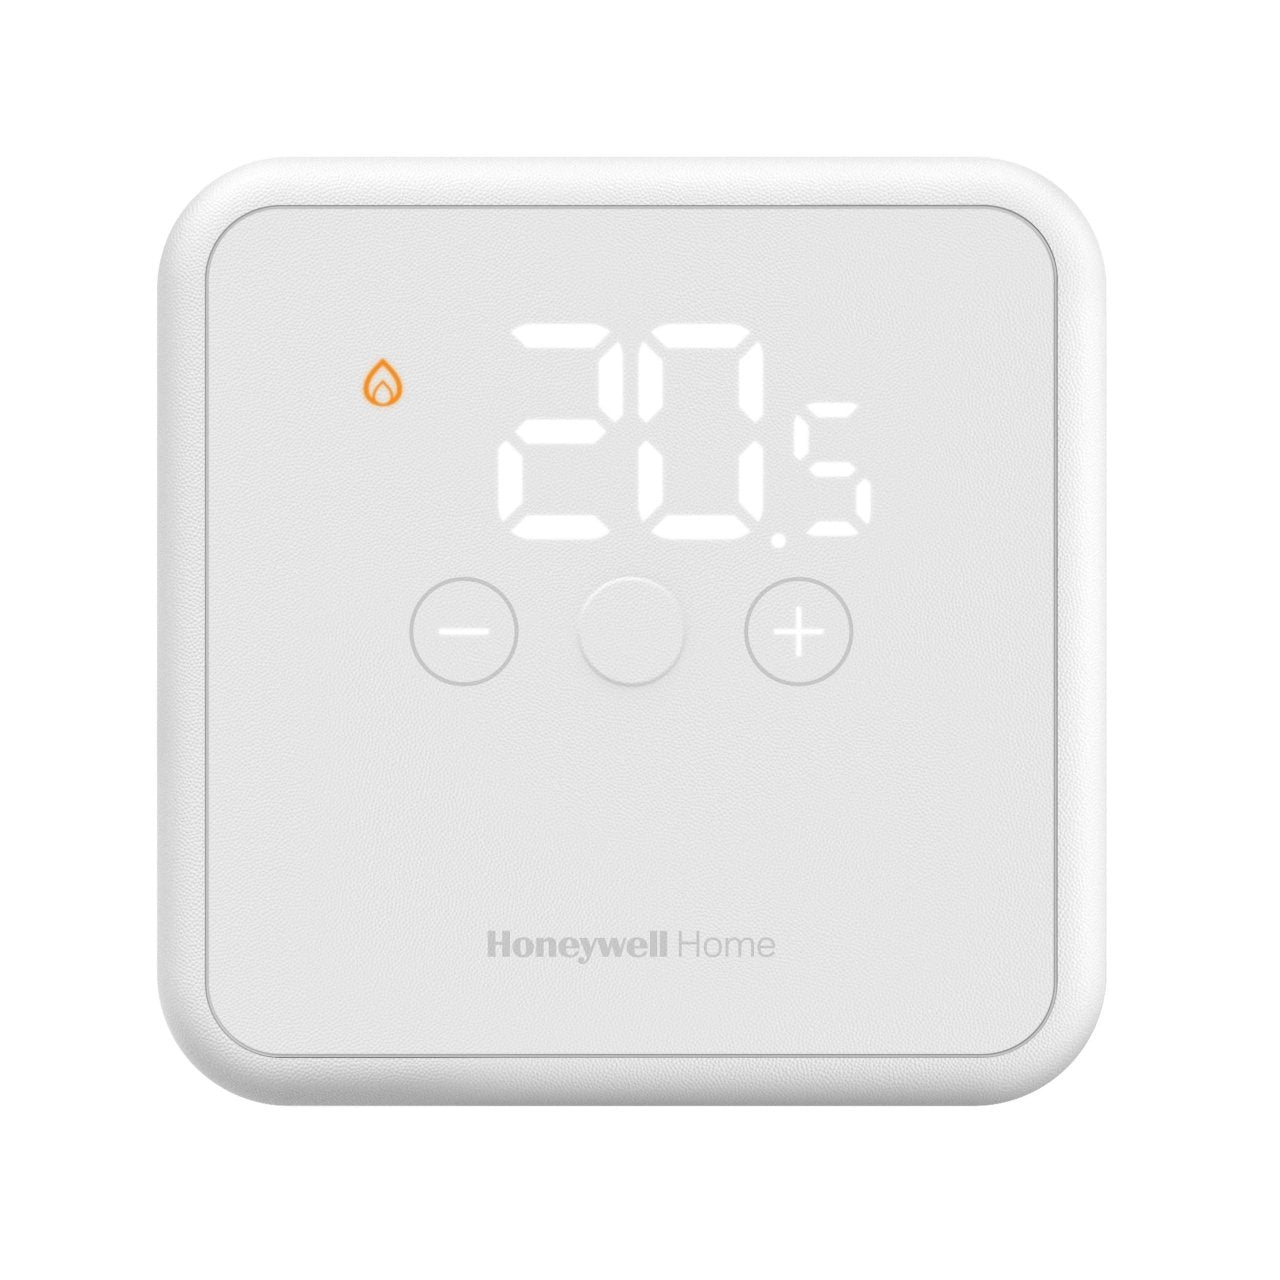 DT4R White Wireless Room Thermostat with On/Off